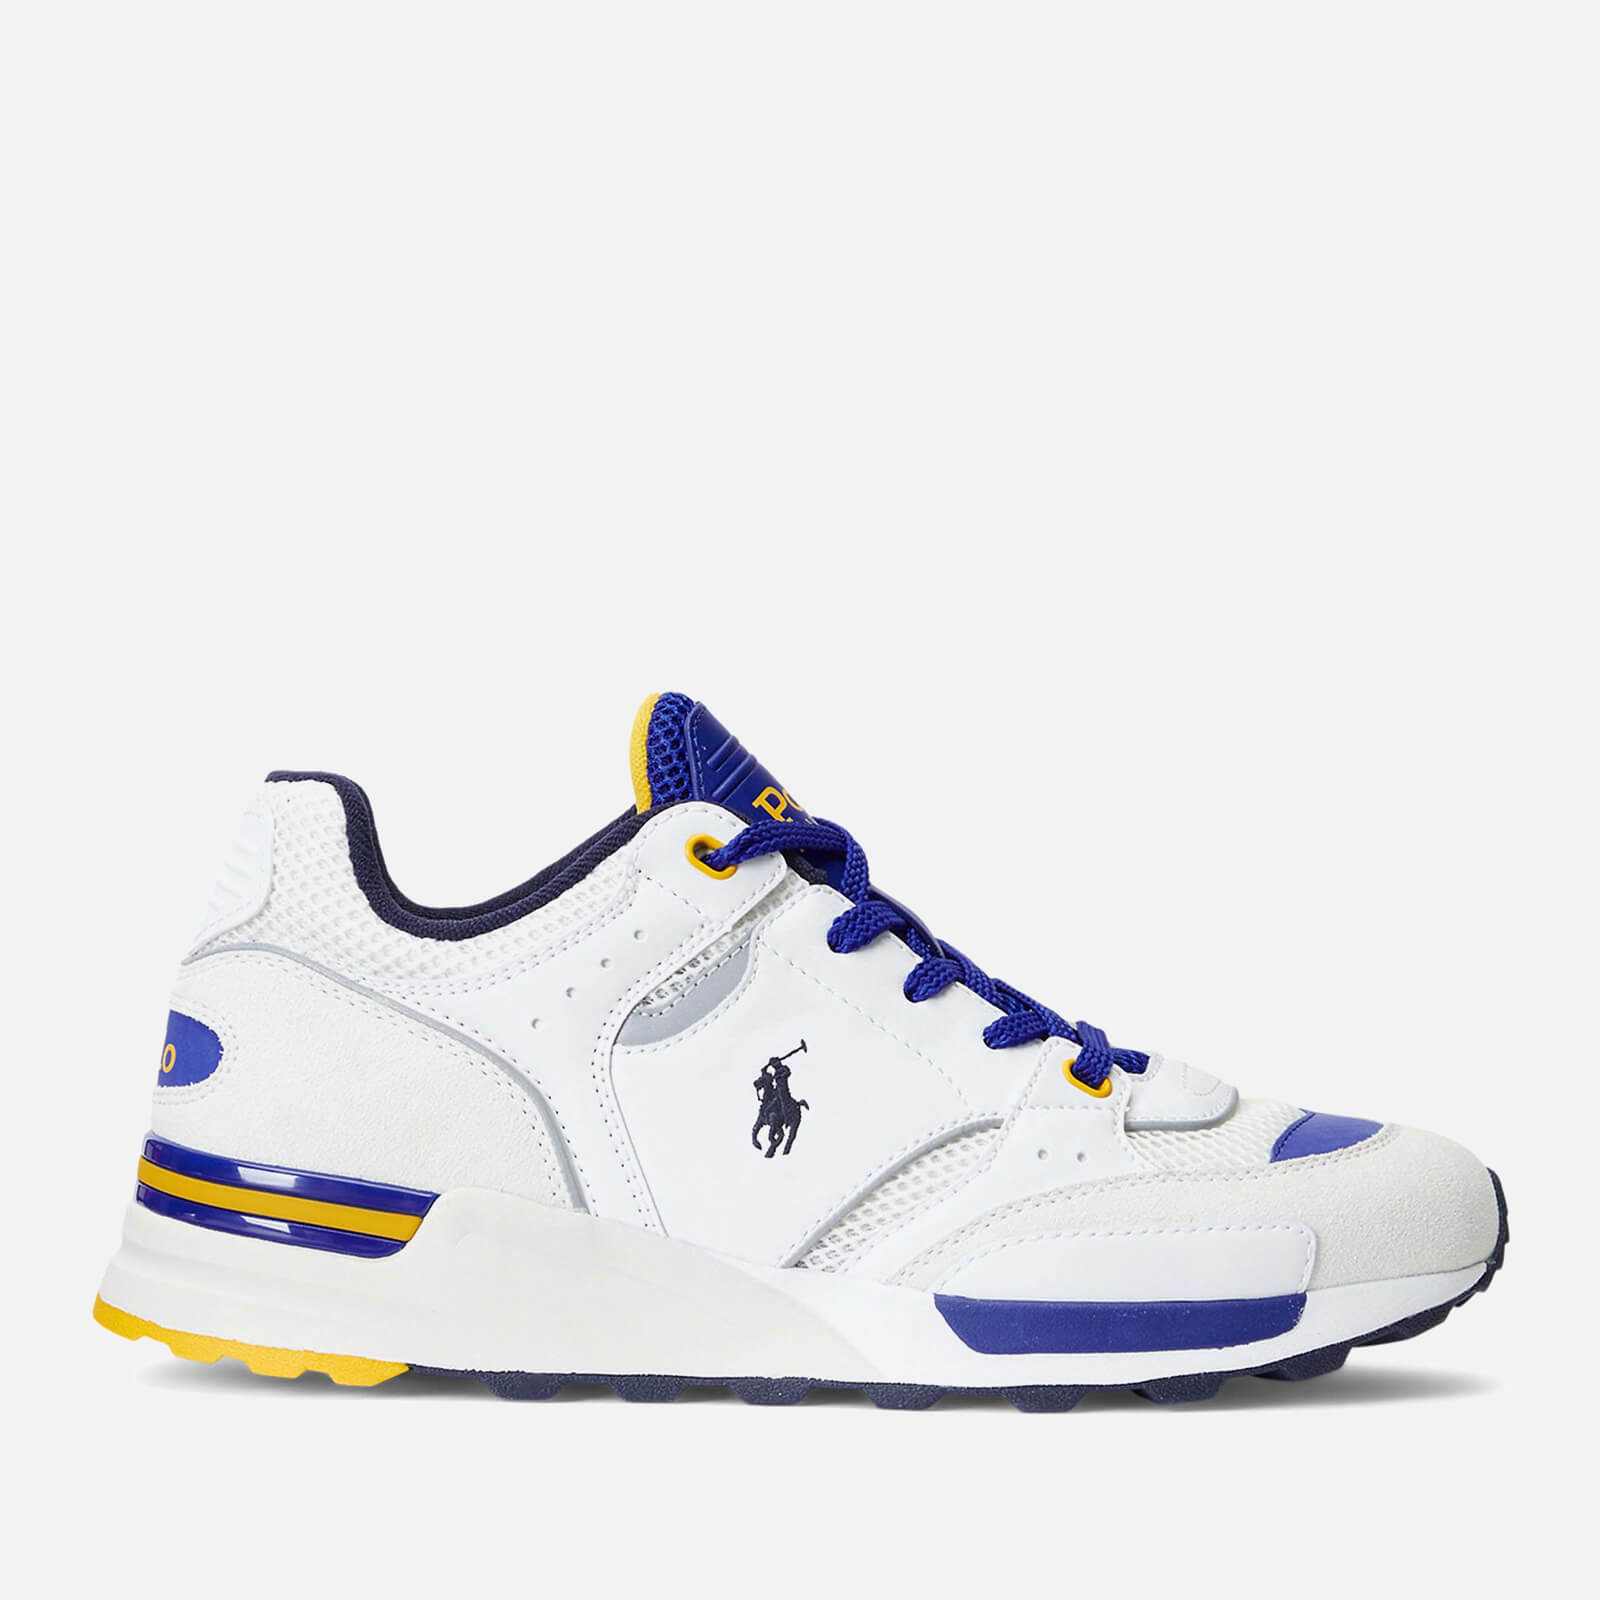 Polo Ralph Lauren Men's Trackster 200 Leather/Mesh Trainers - White/Royal/Gold - UK 8